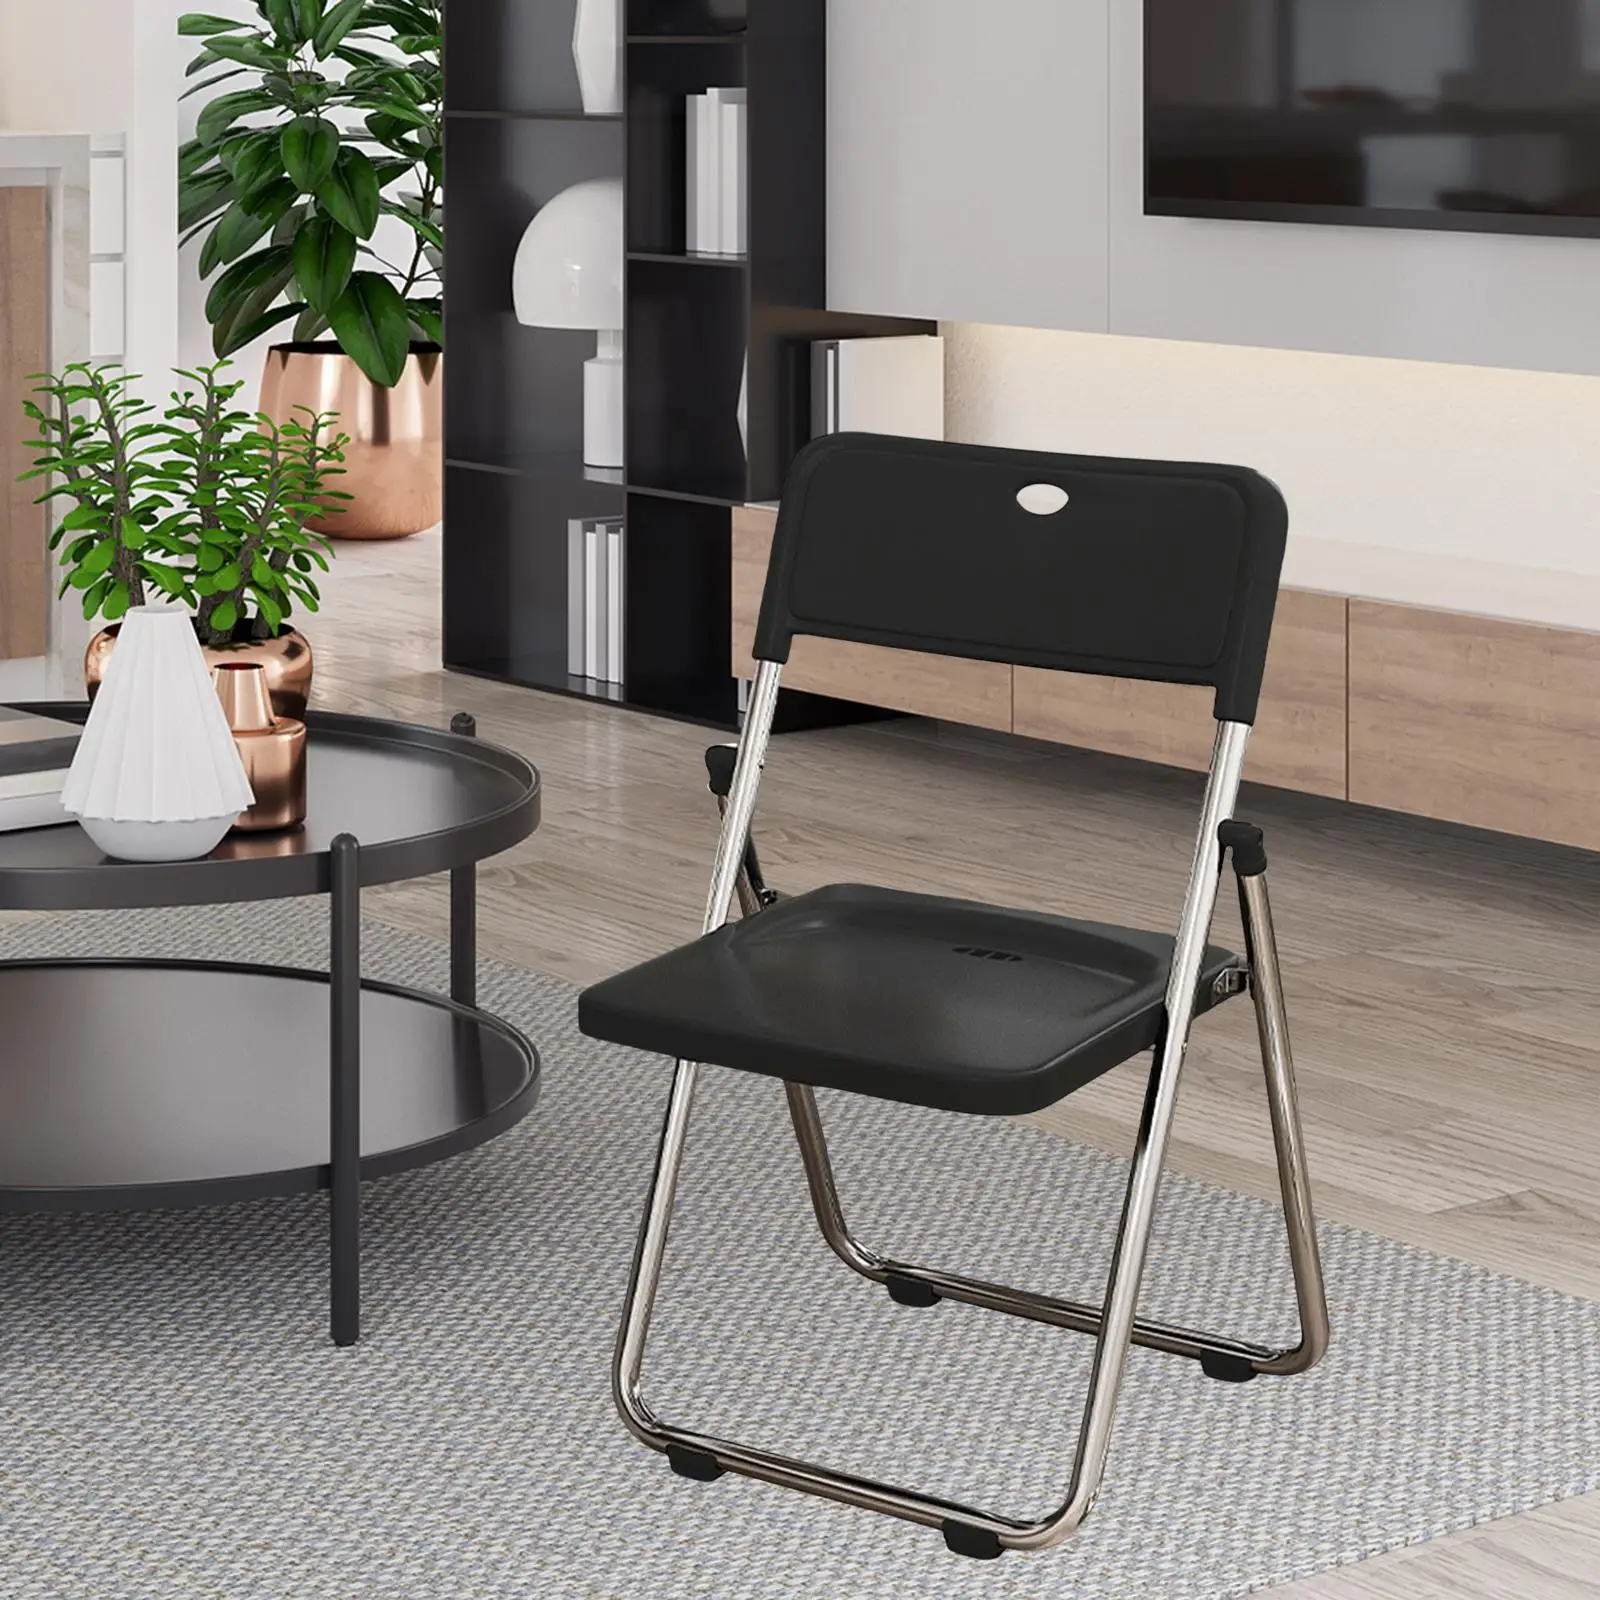 Acrylic Folding Chair Armless Chair Stackable Steel Frame Furniture Photo Chair Makeup Chair for living Room Home